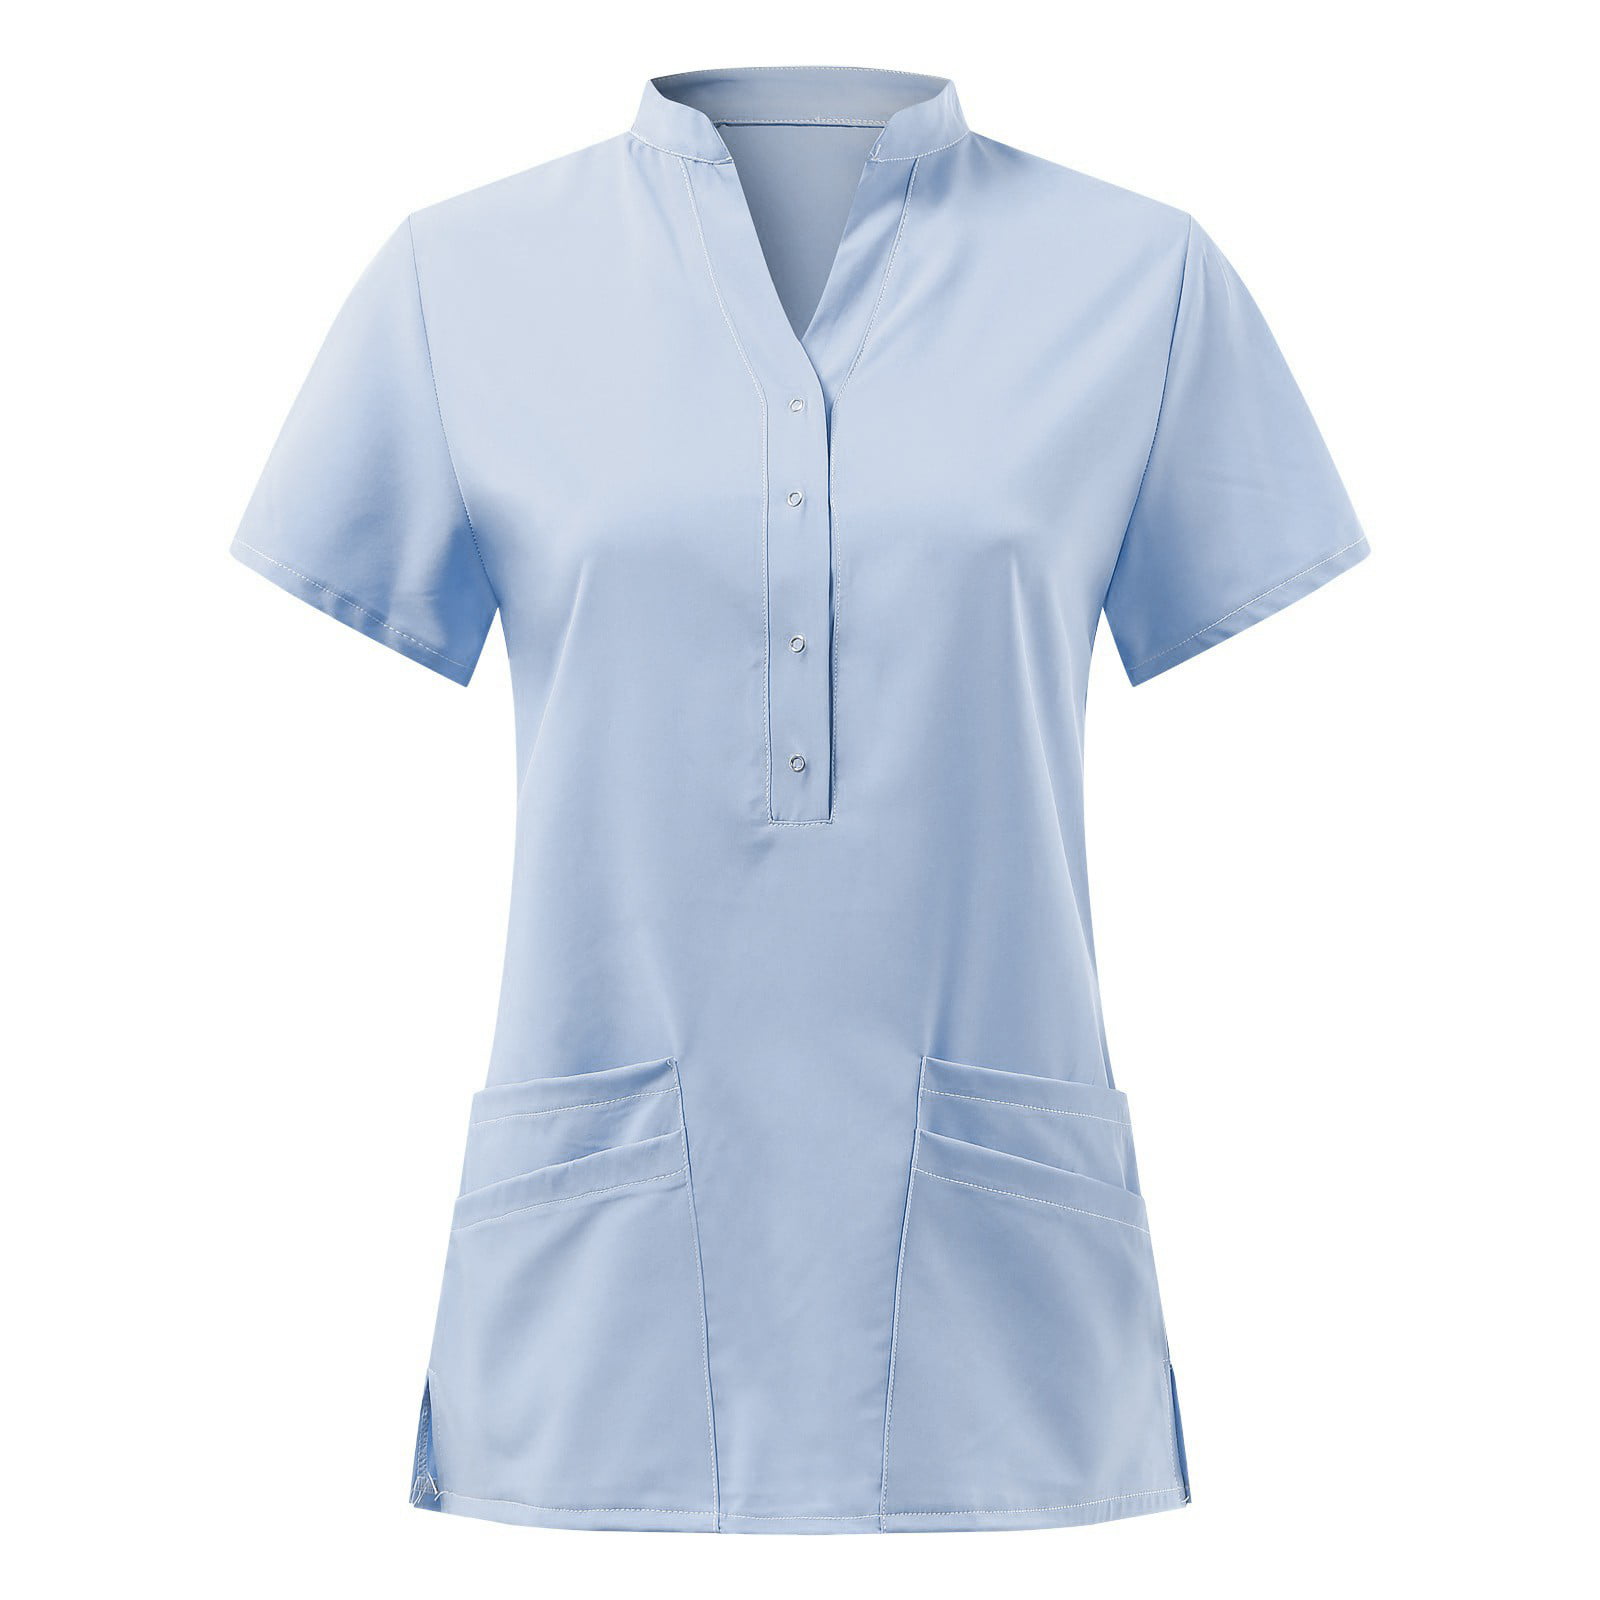 Women Scrubs Top Nurses Clothing Workwear Short Sleeve Button V-Neck Top Working Solid T-Shirts Blouse With Pockets - Walmart.com